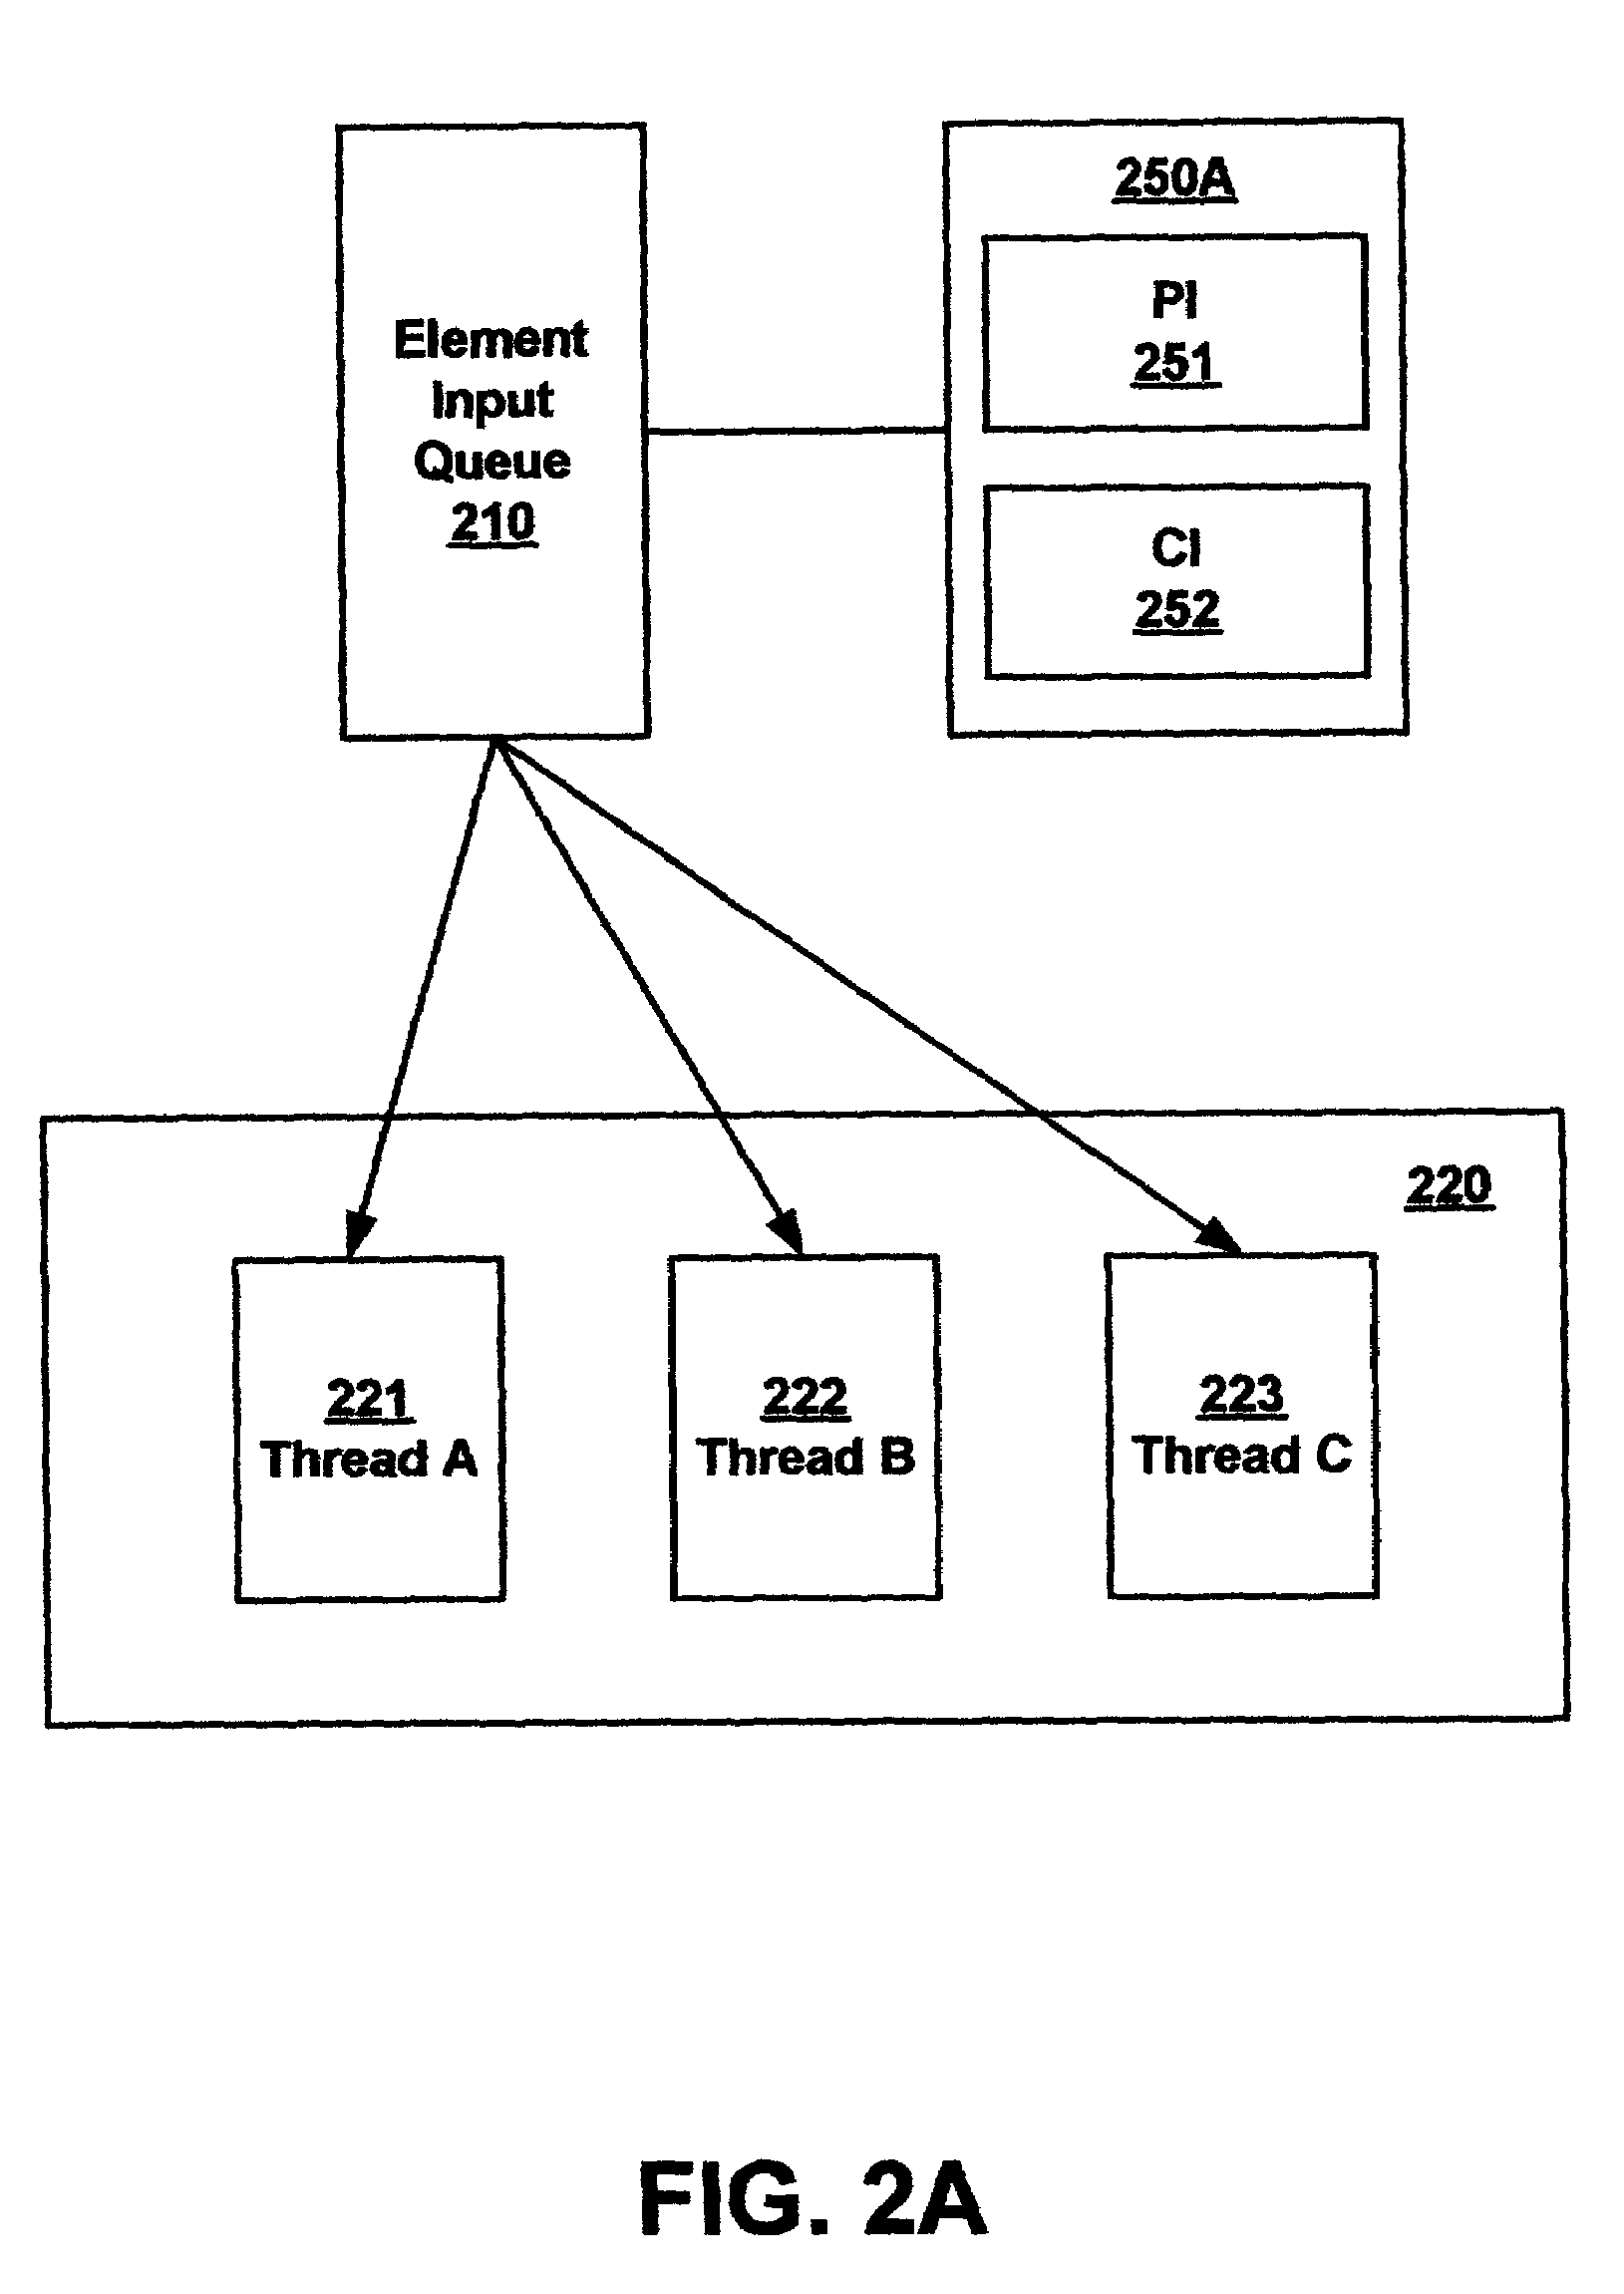 System and method for efficiently processing information in a multithread environment